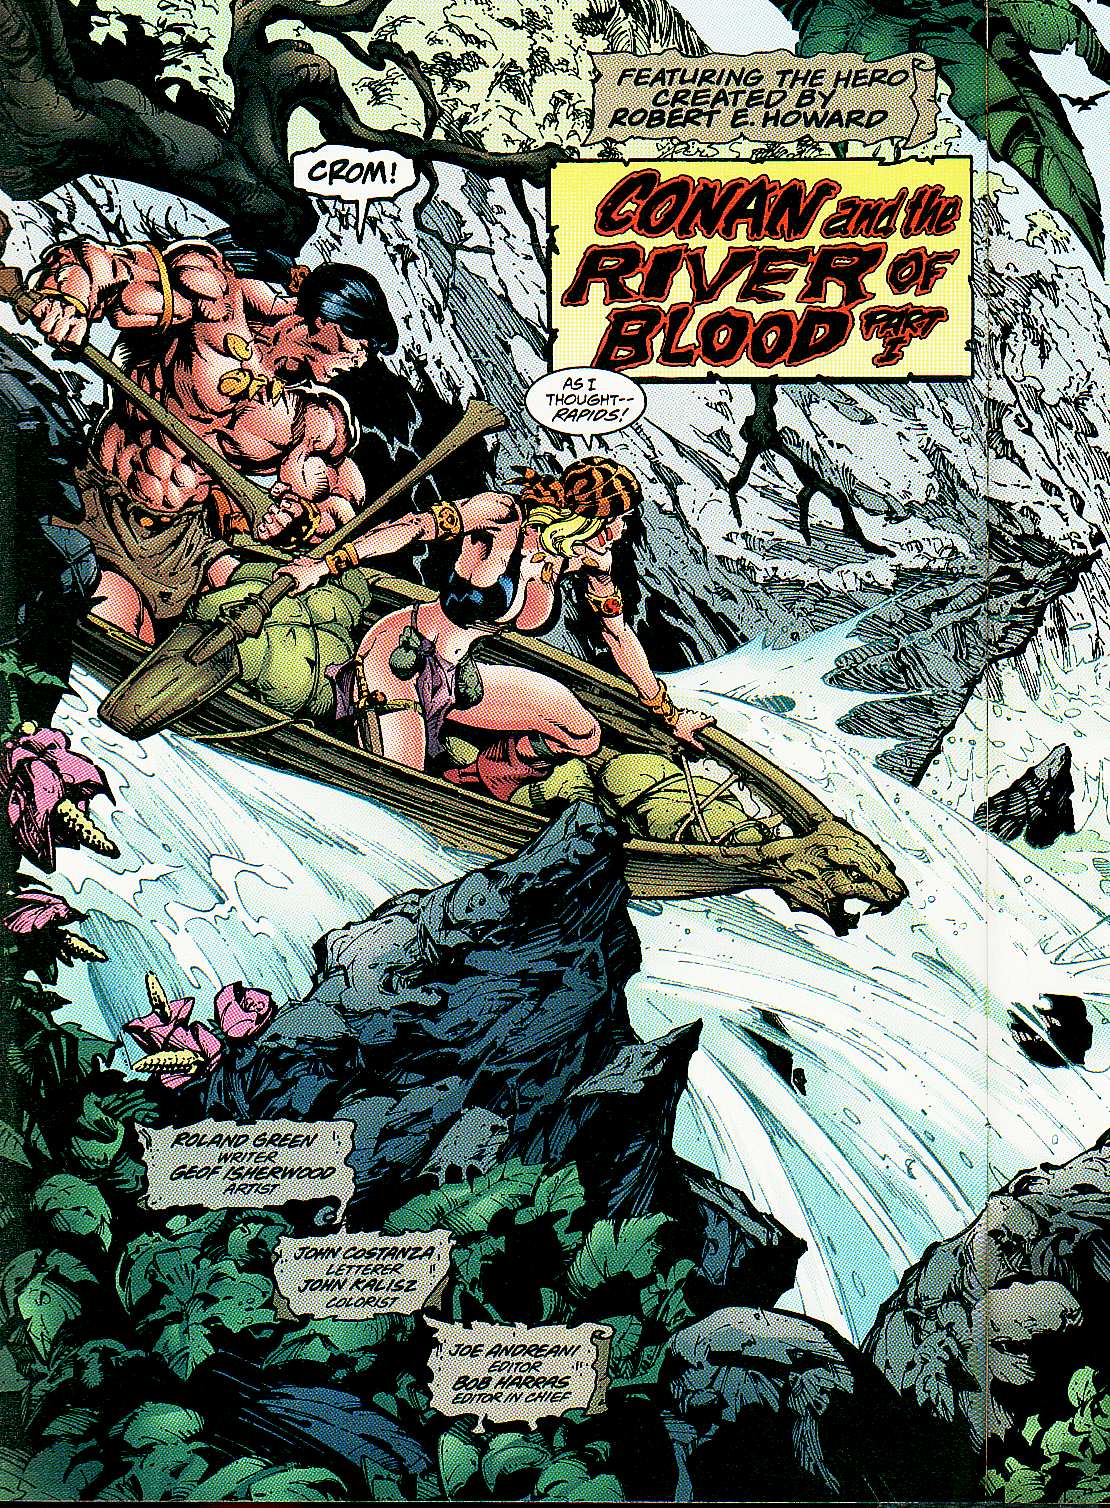 Read online Conan the Barbarian: River of Blood comic -  Issue #1 - 5